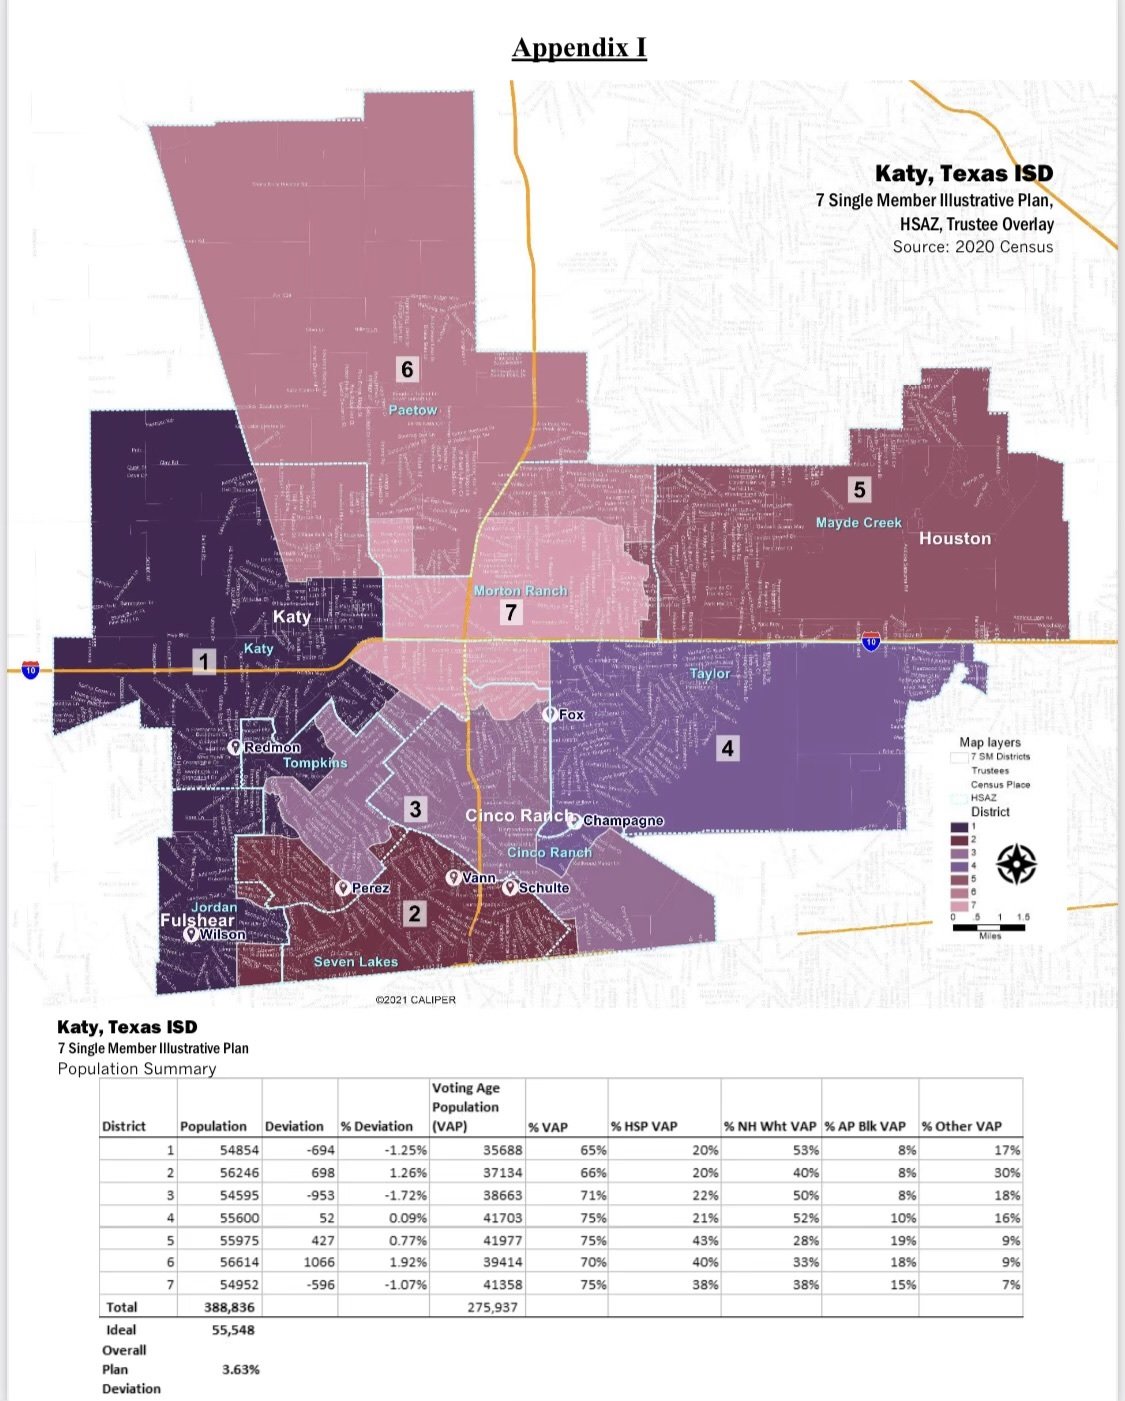 The NAACP Legal Defense Fund prepared this map for single-member district representation by Katy ISD board trustees. A group of Katy ISD parents is working with the NAACP to promote replacing the current at-large representation setup.